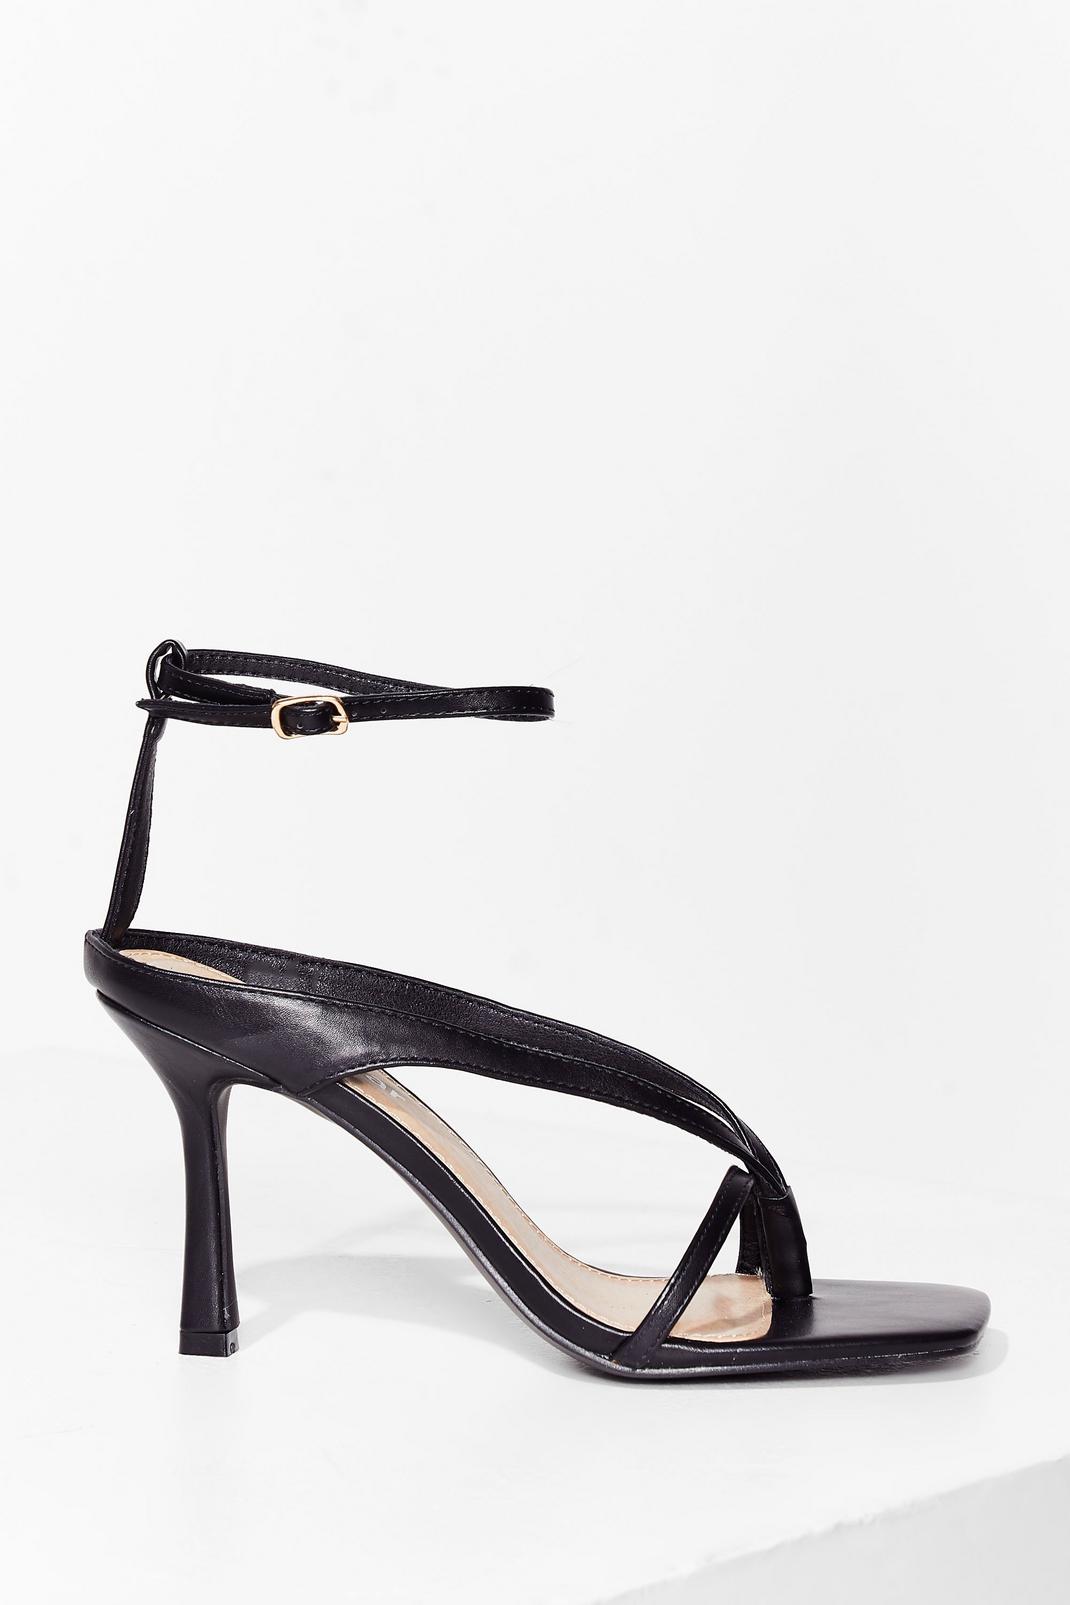 Strappy Stiletto Faux Leather Heels | Nasty Gal